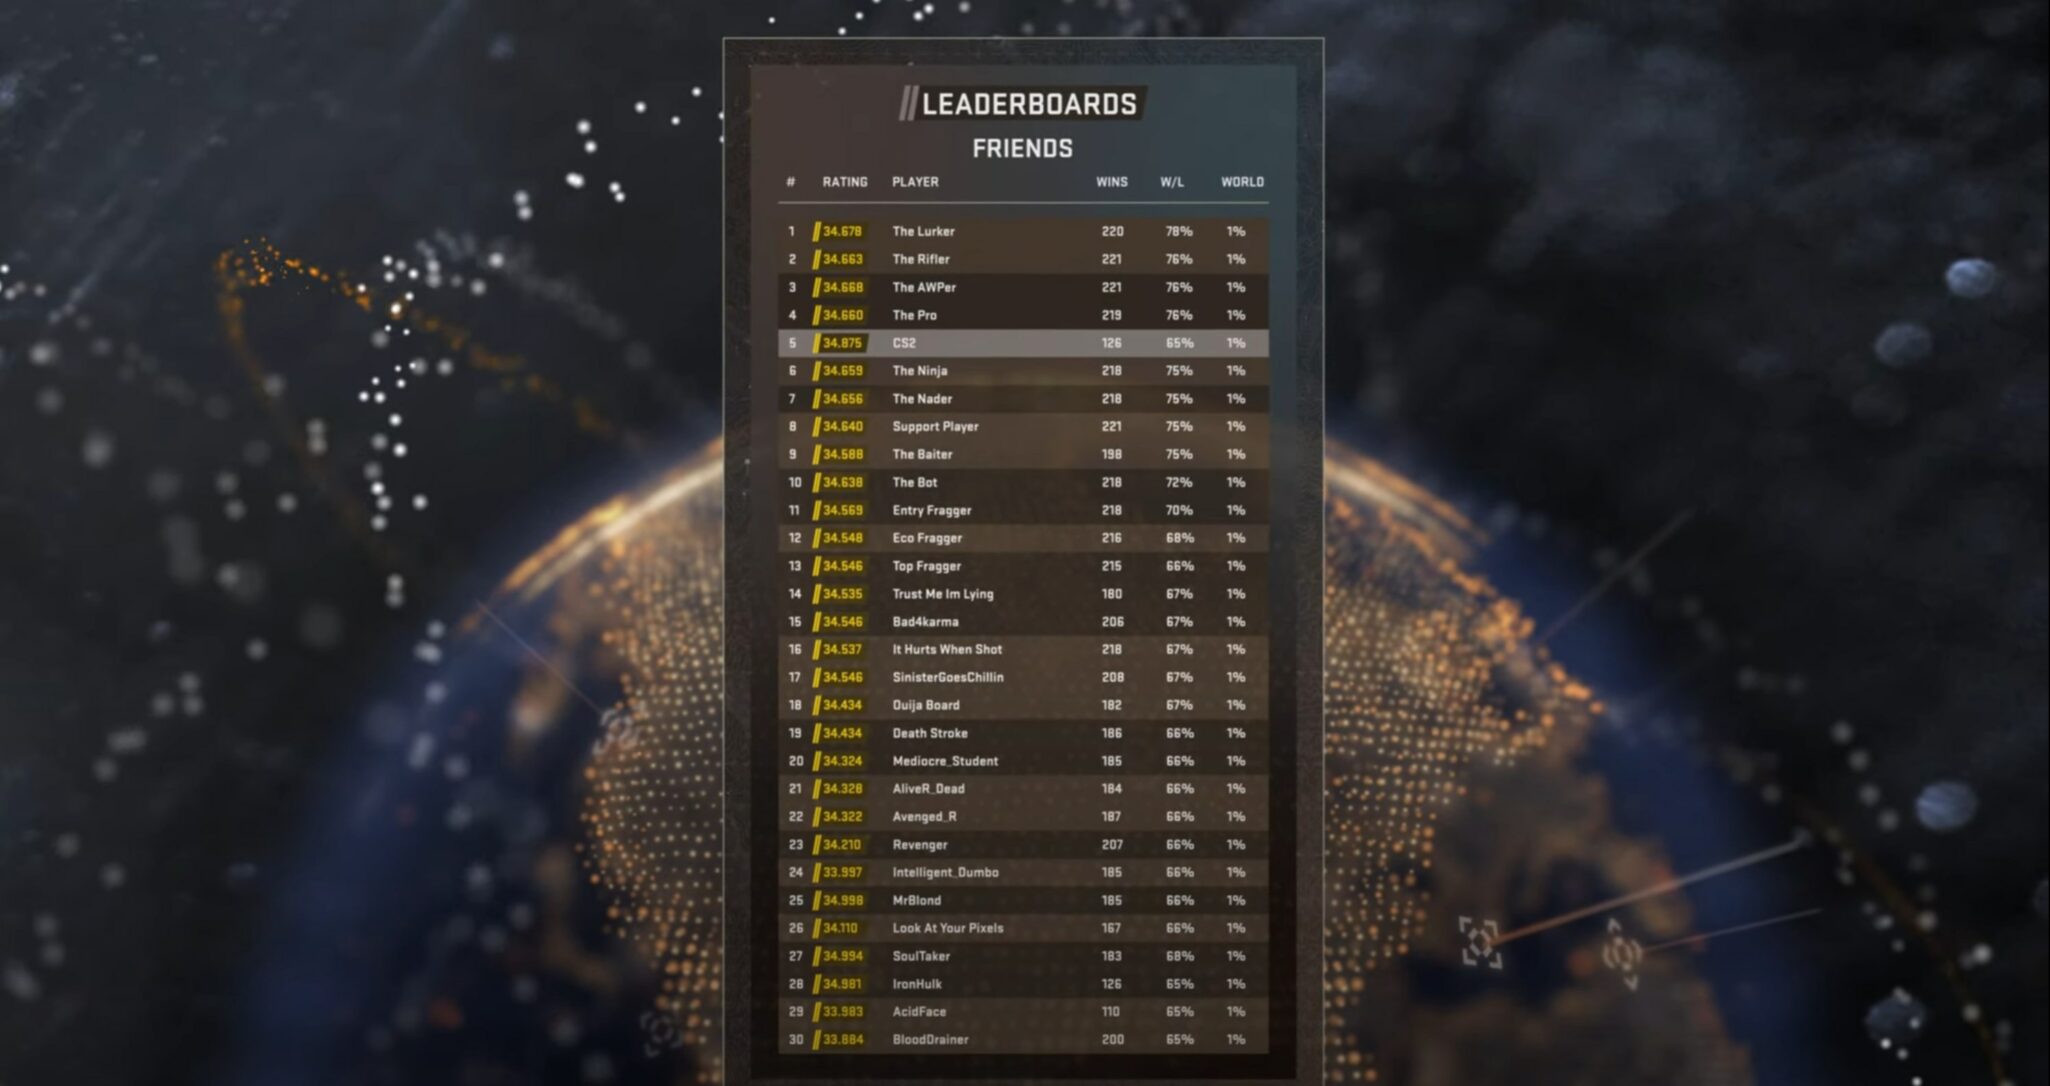 Leaderboards][WOW Scores] - Add leaderboards to your games